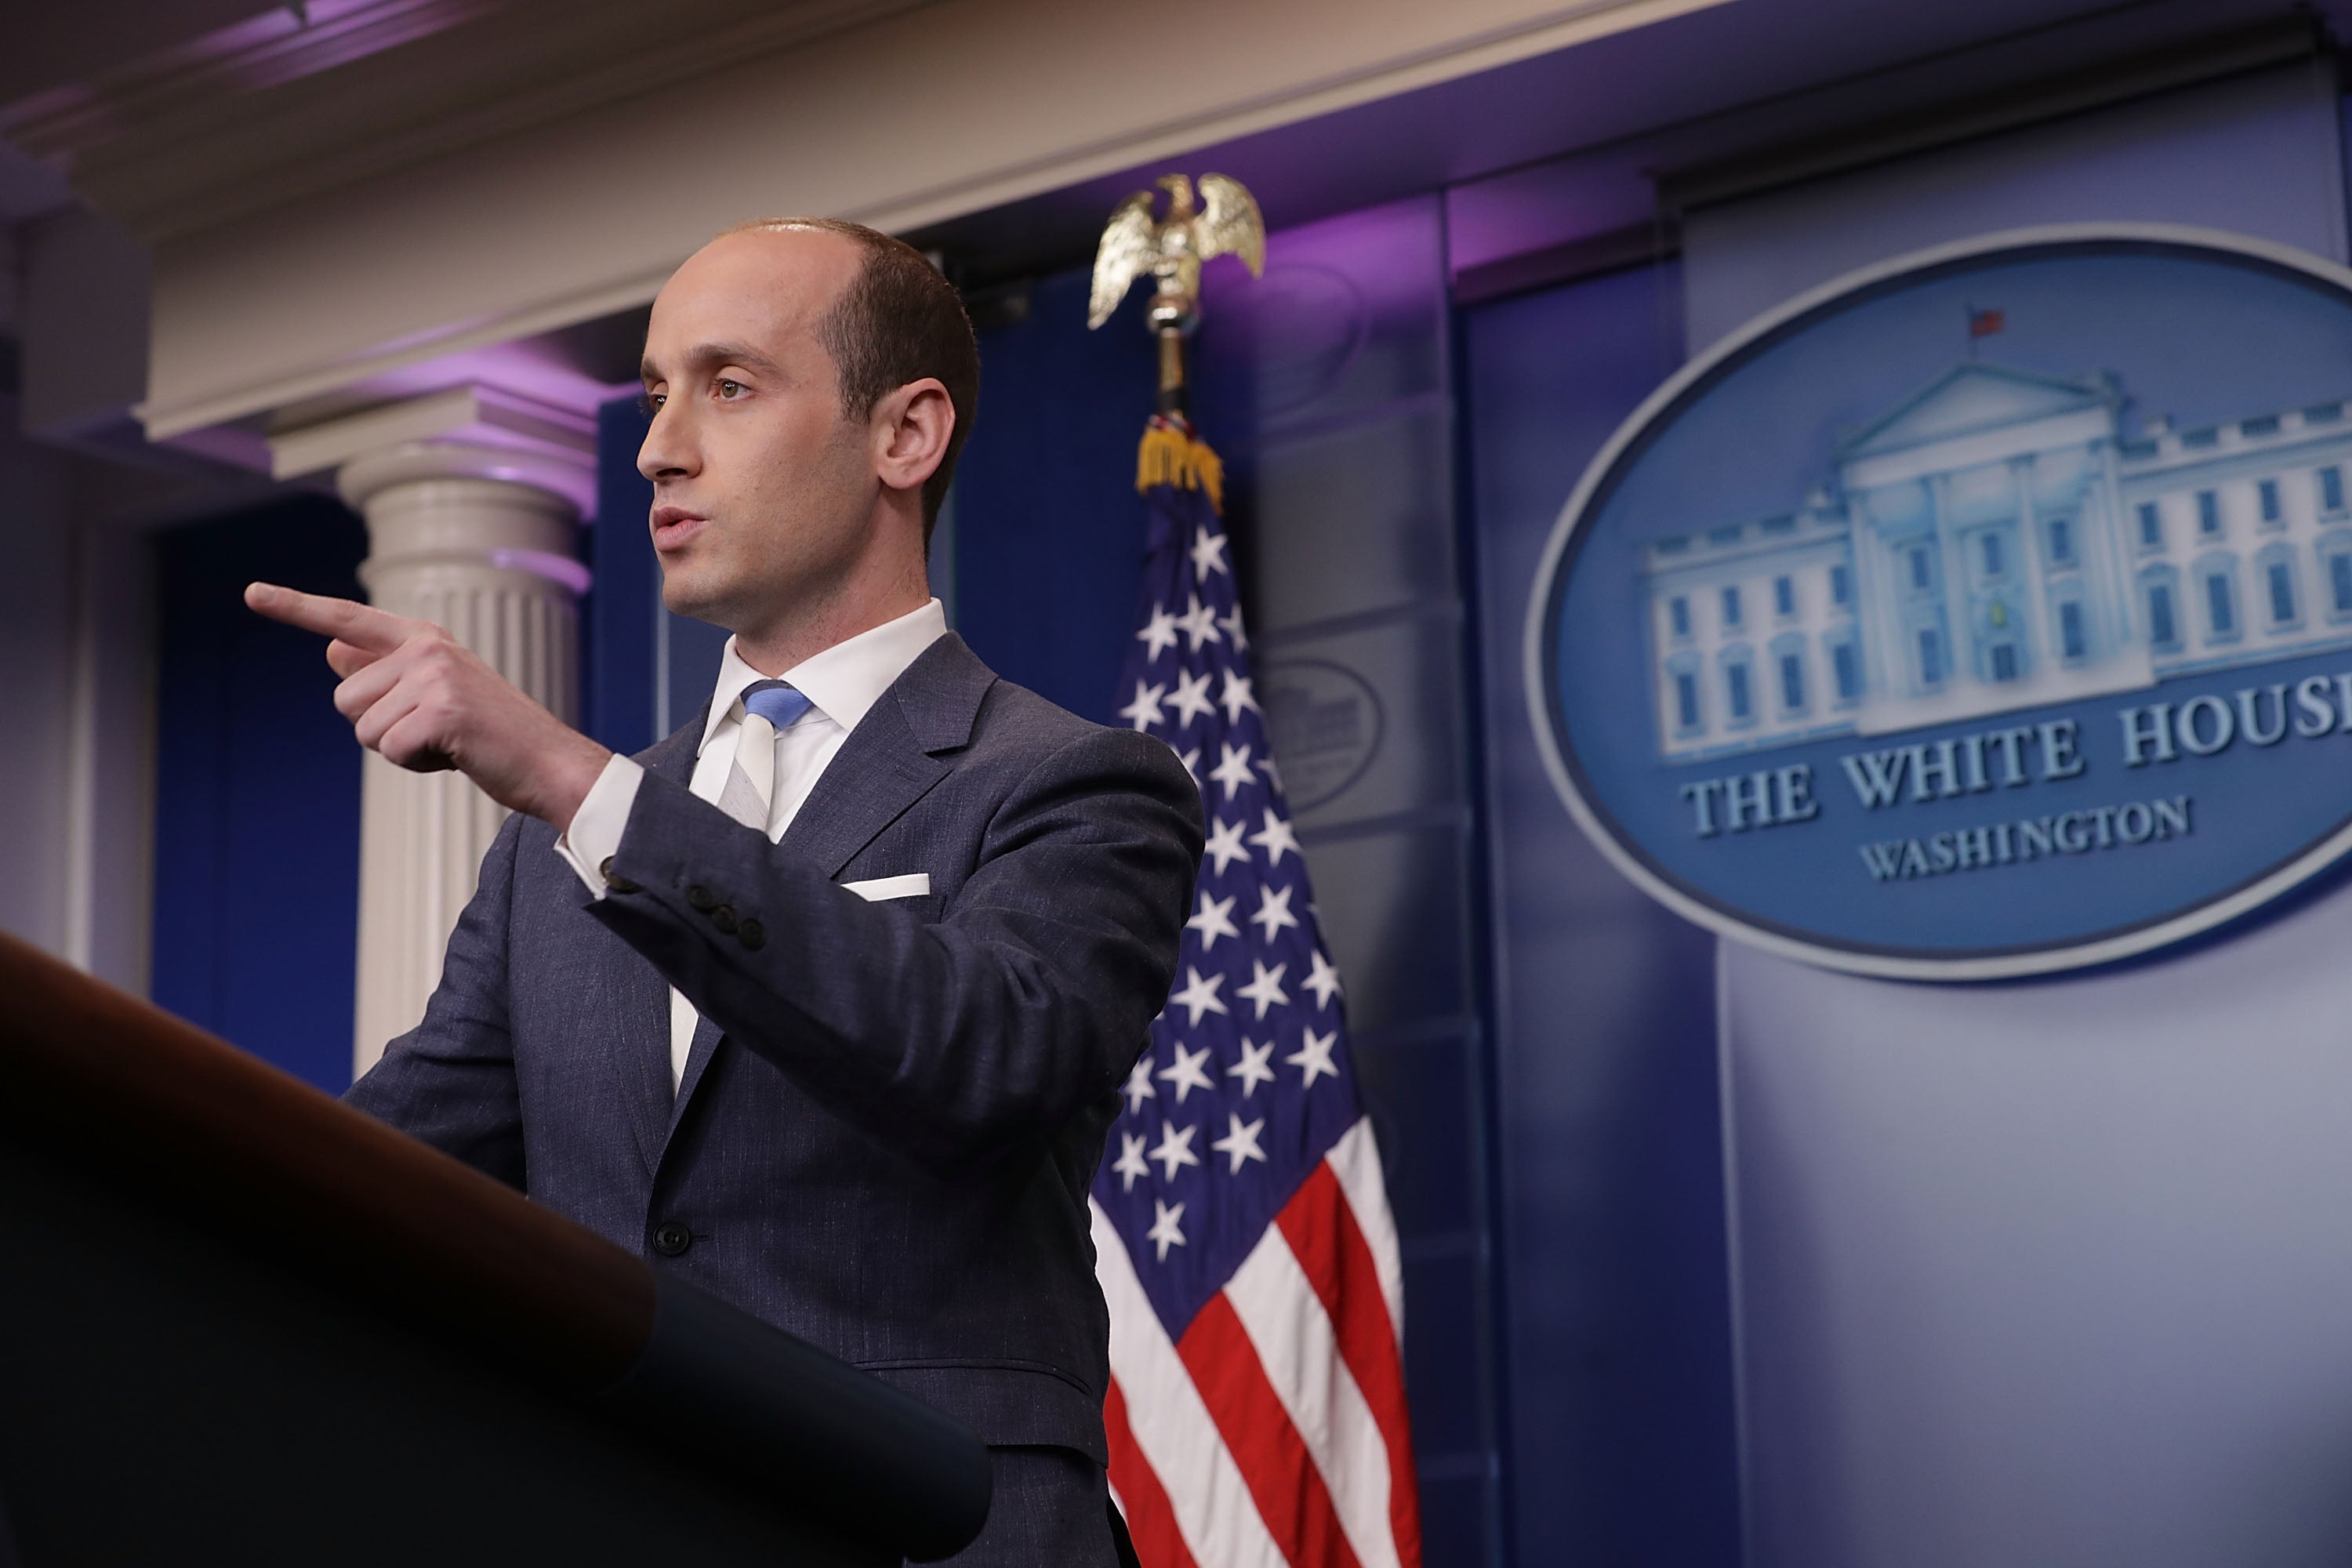 Stephen Miller And His White Nationalist Views Are Being Considered To Replace Scaramucci 